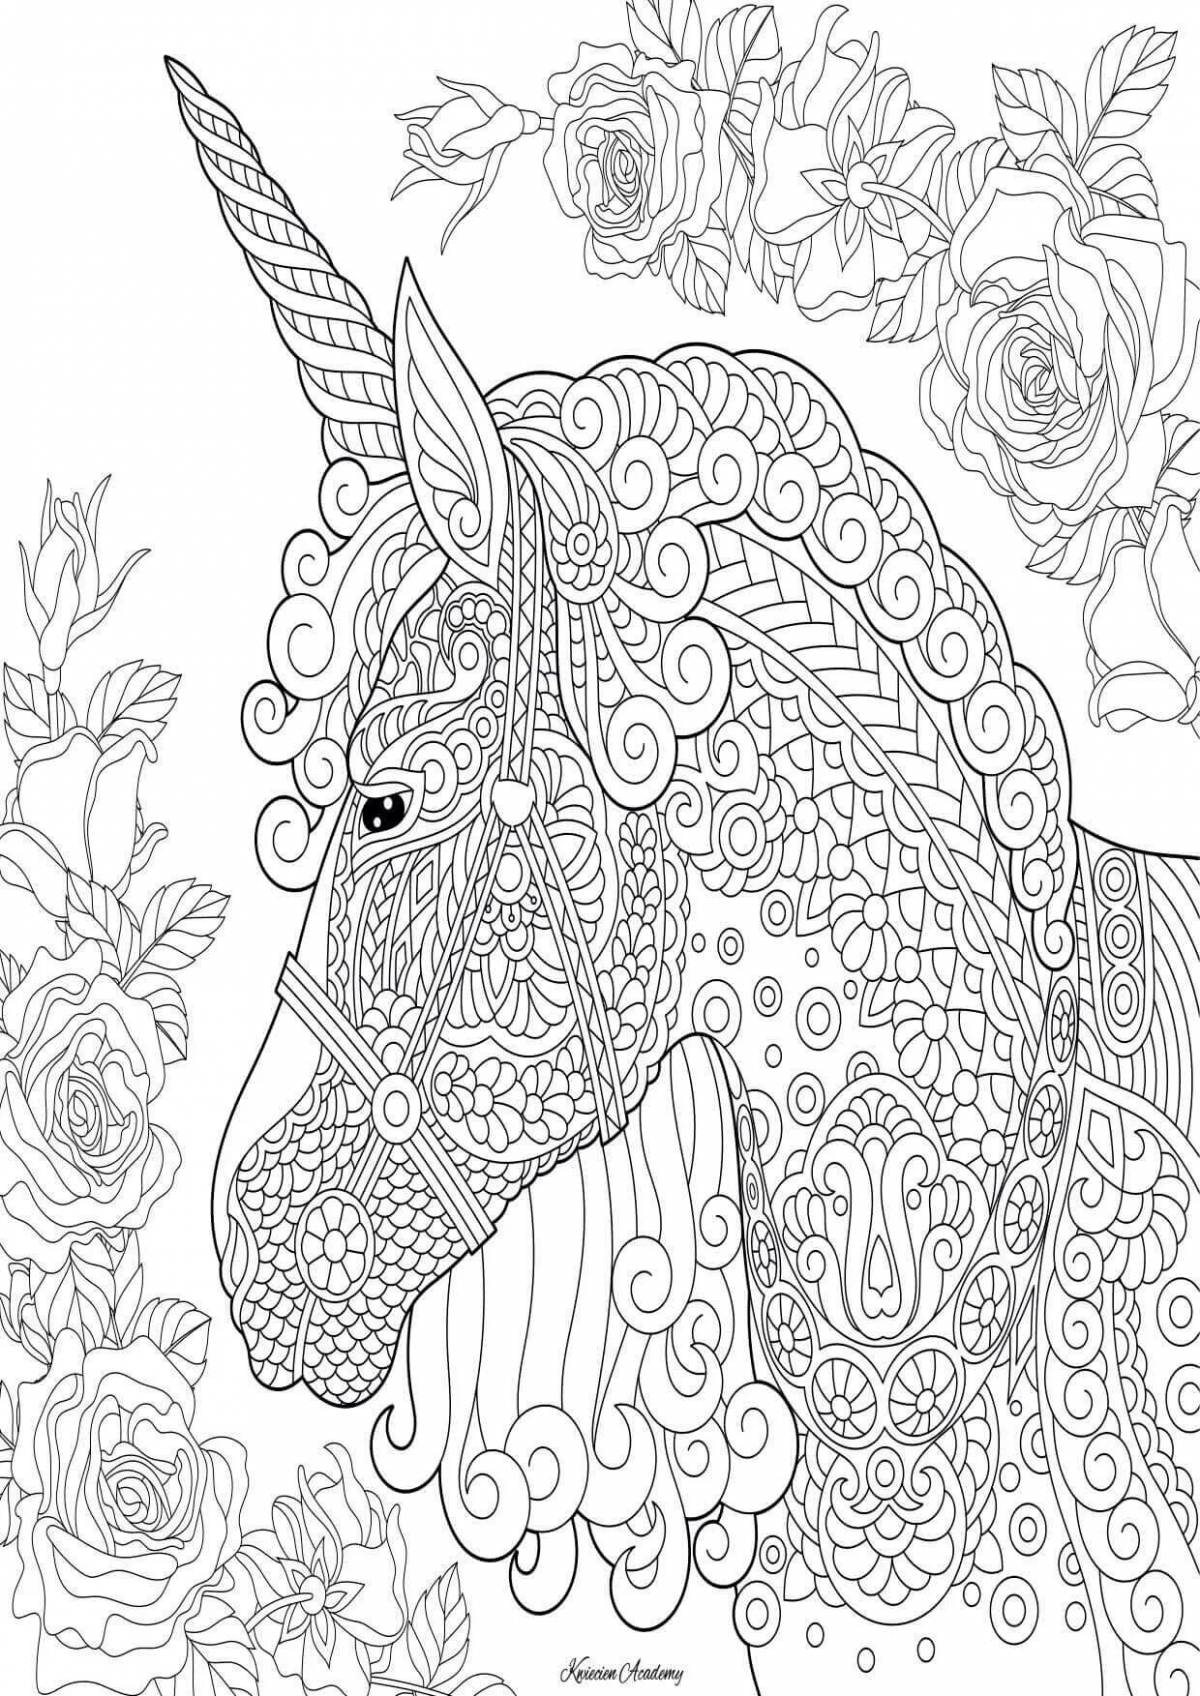 Funny antistress unicorn coloring book for kids